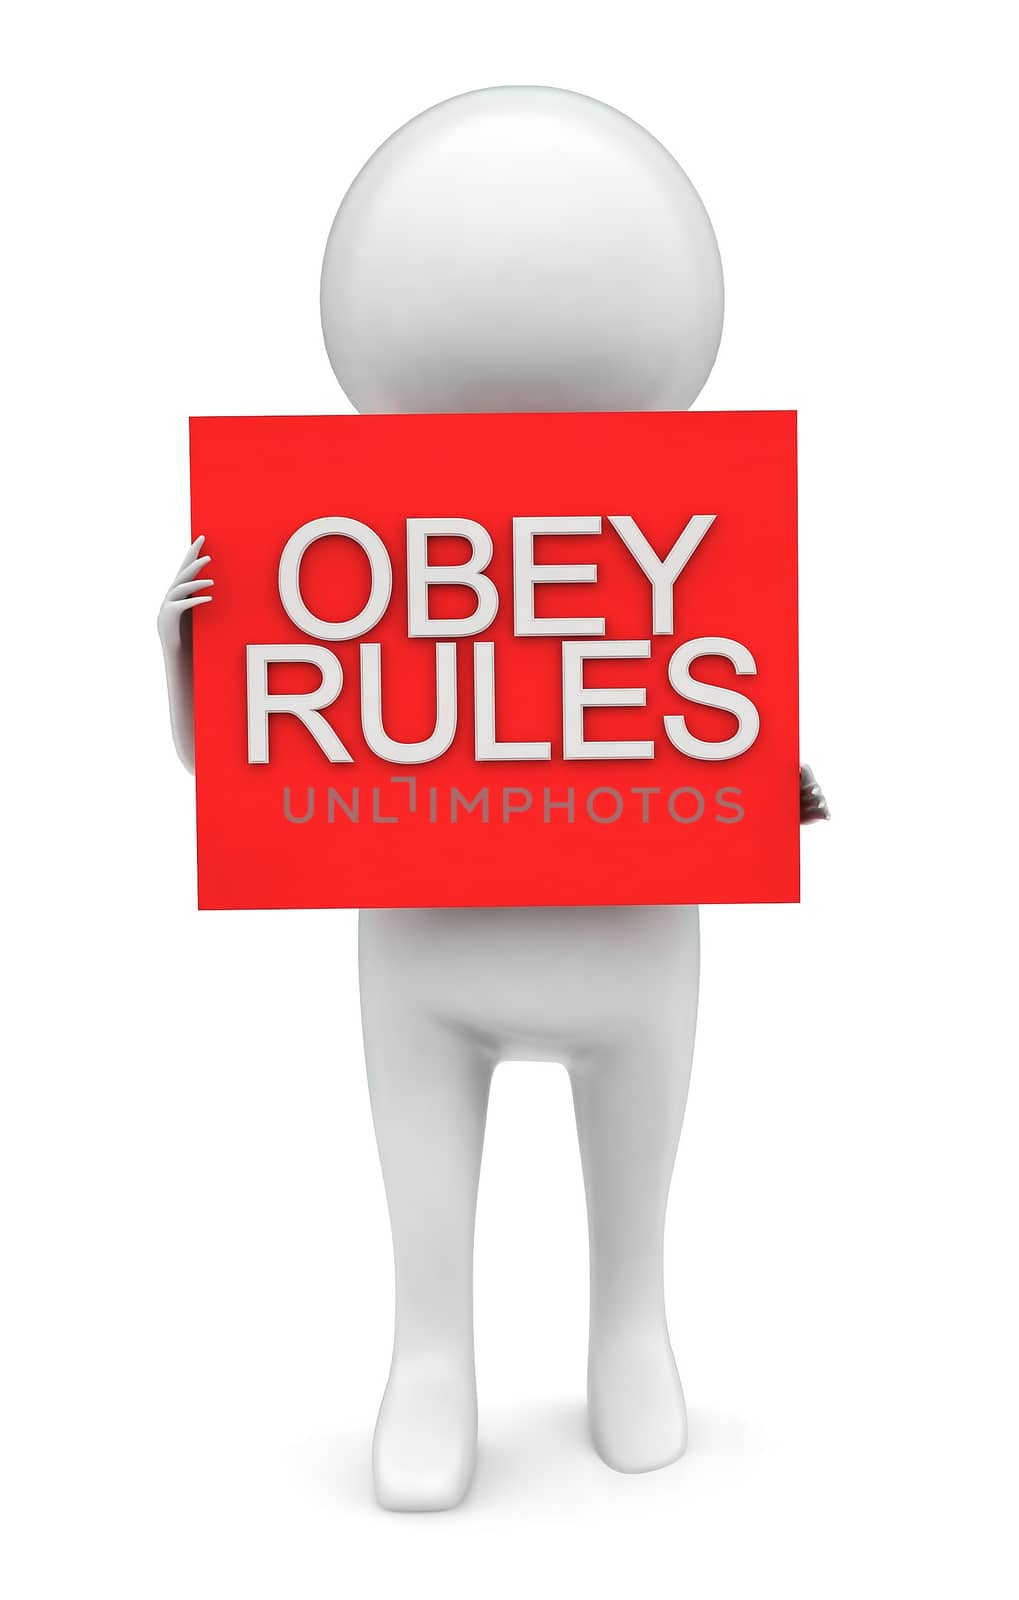 3d man presenting obey rules text projected on a box concept by qualityrender